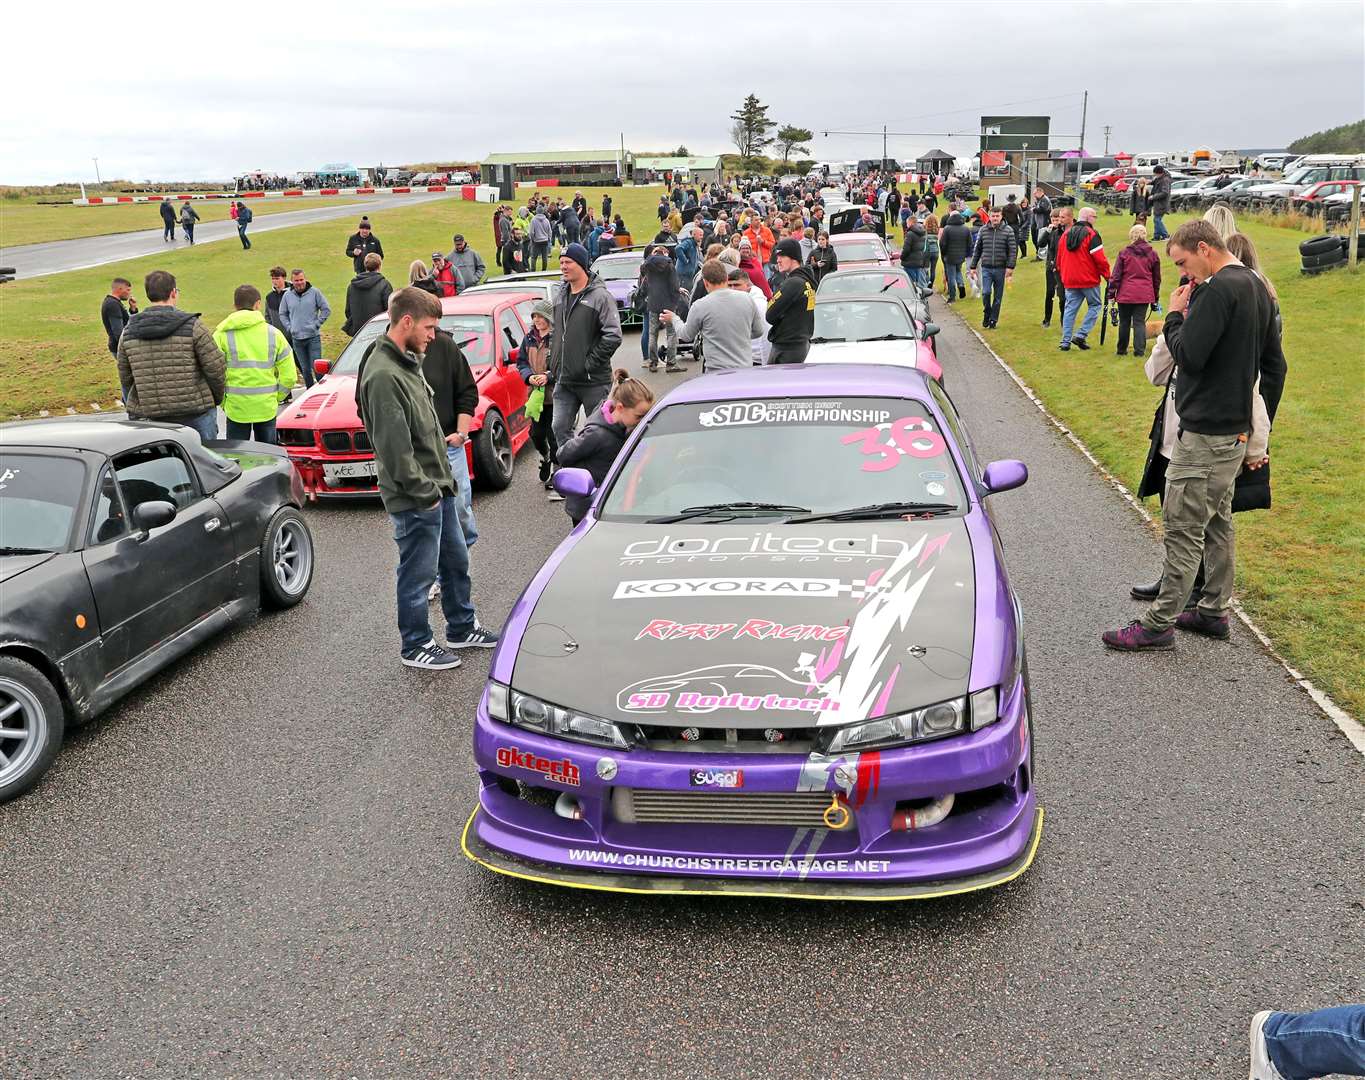 Spectators get the opportunity to see the cars up close and speak to drivers at the Drift Scotland event in Golspie. Picture: James Gunn